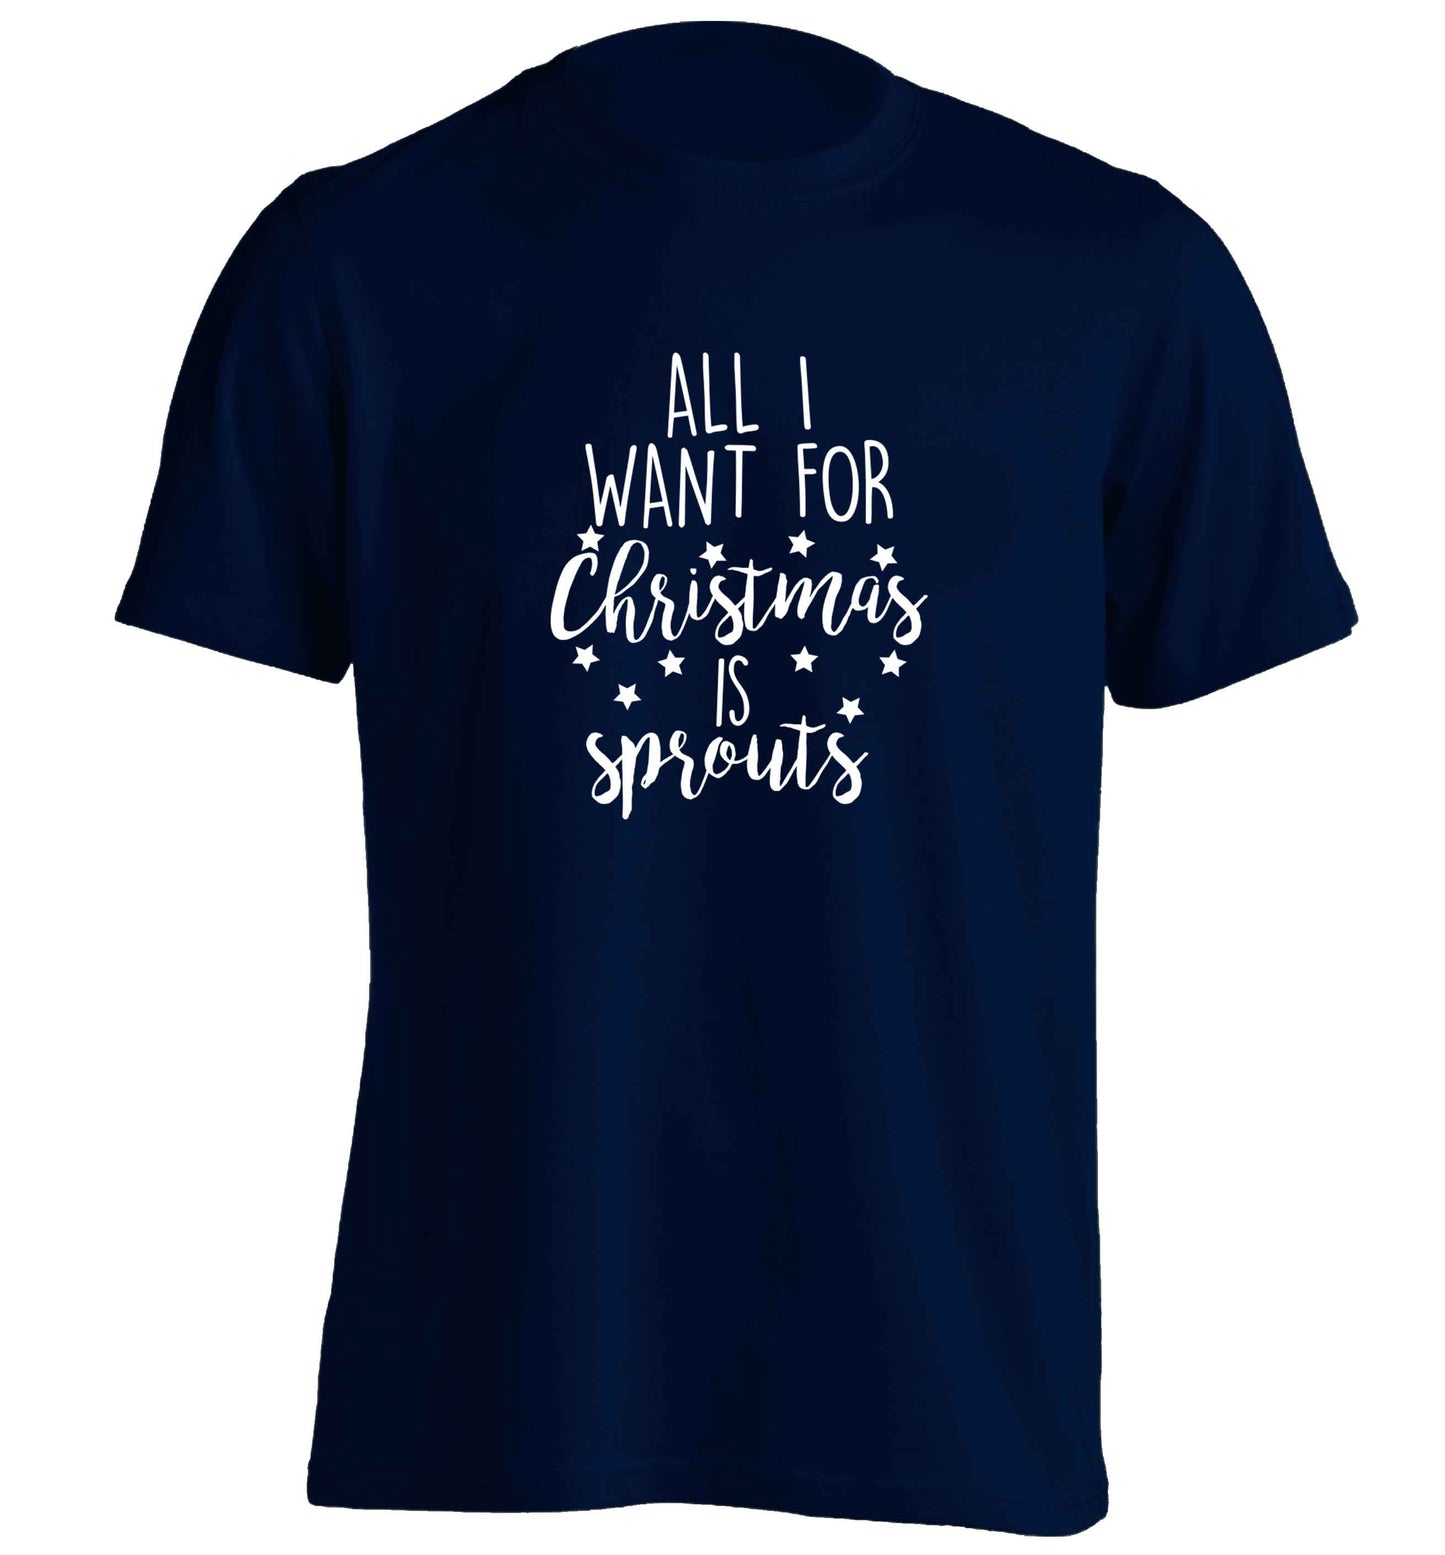 All I want for Christmas is sprouts adults unisex navy Tshirt 2XL